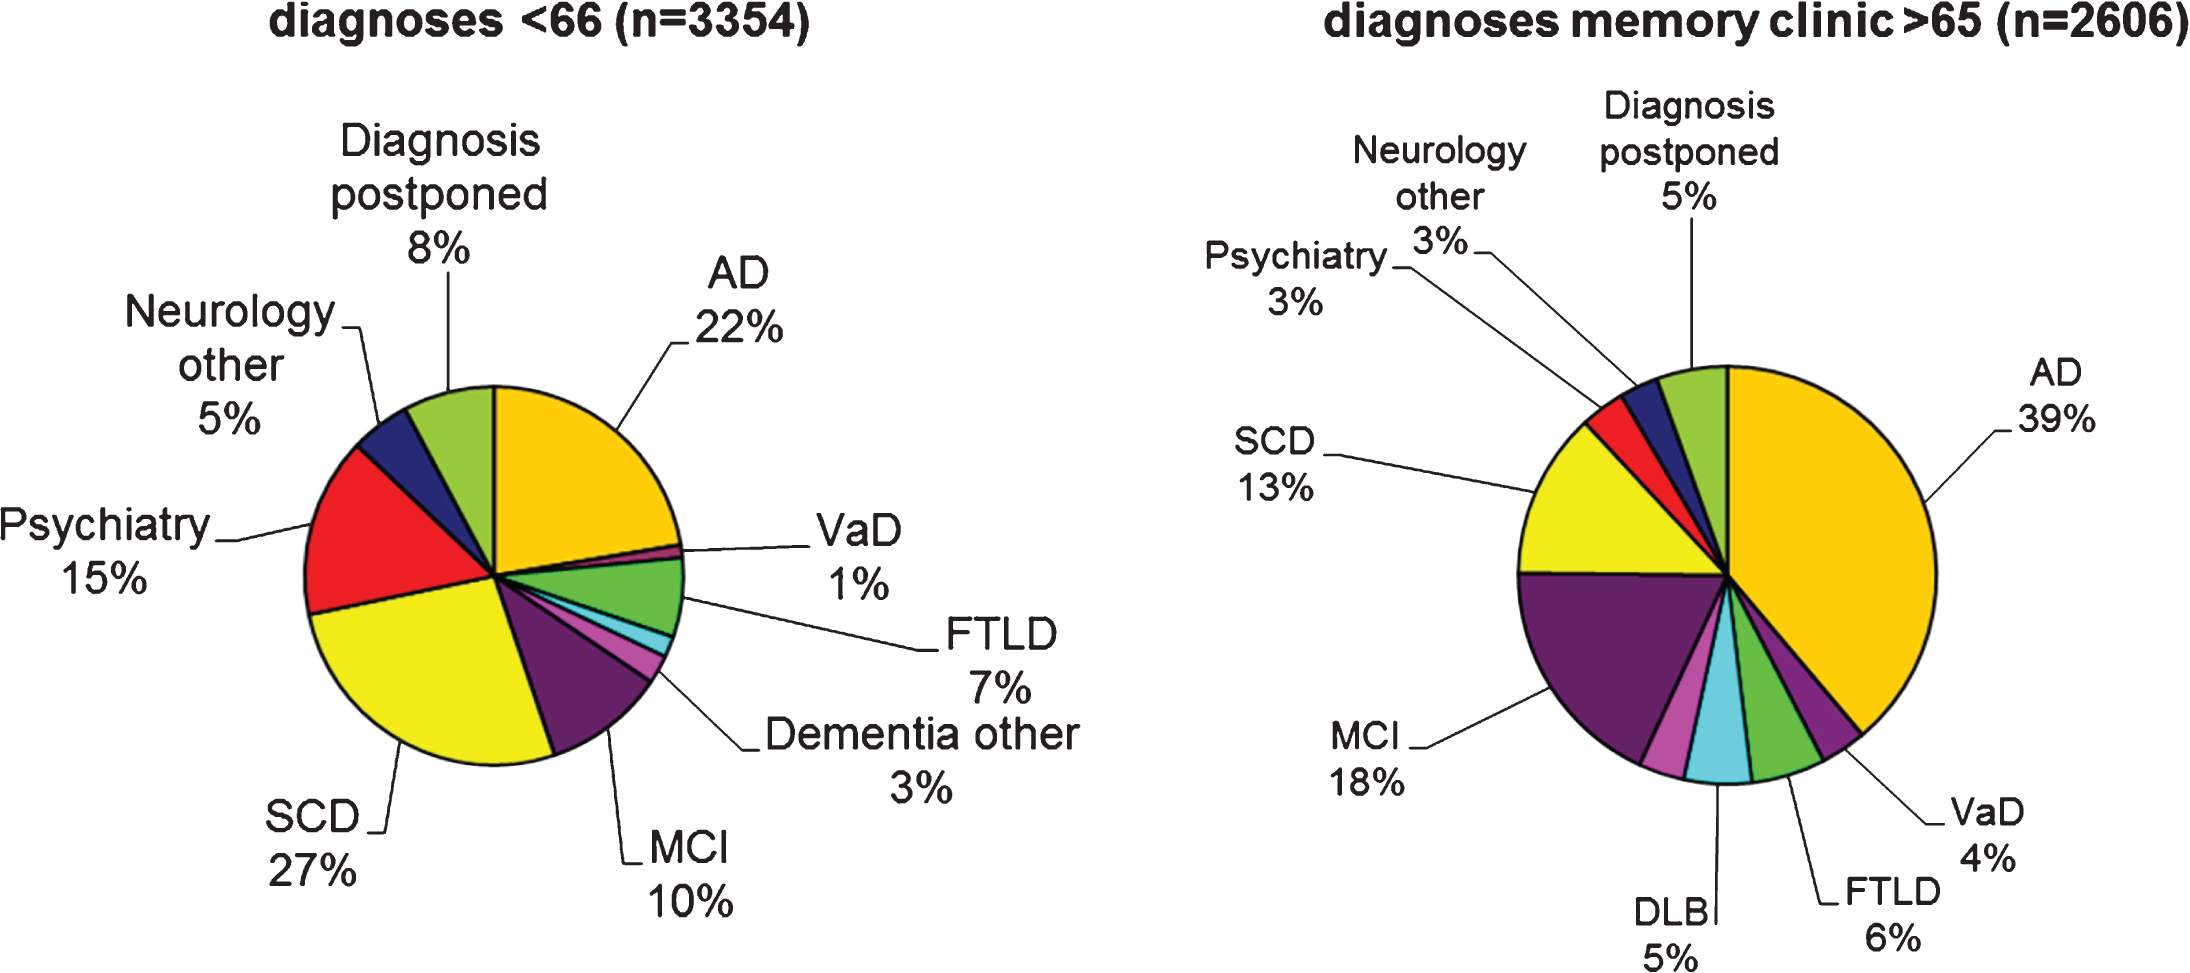 The pie charts show initial diagnoses in the Amsterdam Dementia Cohort, according to age-at-onset. The pie charts are based on 5,960 patients who formed the Amsterdam Dementia cohort in September 2017. At younger age, the most frequent diagnosis is SCD, followed by AD. In the older age group, AD and MCI are the two most frequent diagnoses. Due to the relatively young age of the patients visiting our center, more rare diagnoses such as frontotemporal dementia are relatively frequent. AD, probable and possible Alzheimer’s disease; VaD, vascular dementia; FTLD, frontotemporal lobar degeneration, includes both behavioral variant FTD and primary progressive aphasia; DLB, dementia with Lewy bodies; Dementia other include other types of dementia such as Creutzfeldt-Jakob disease, corticobasal degeneration, progressive supranuclear palsy, and alcohol dementia; MCI, mild cognitive impairment.